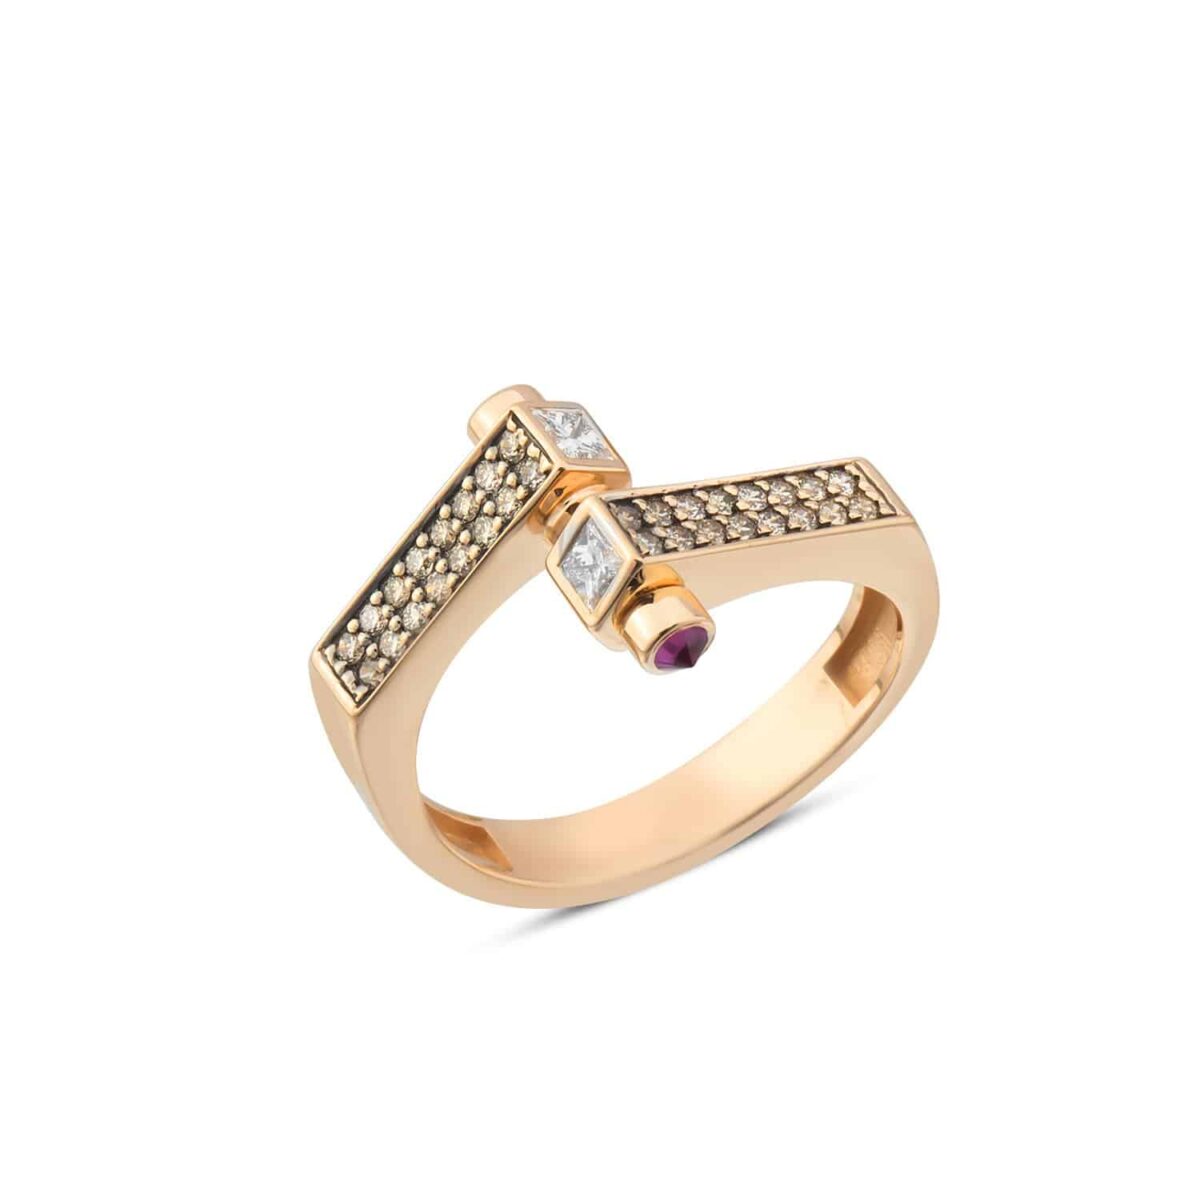 Sia Ring (Champagne Diamond) - Intersecting